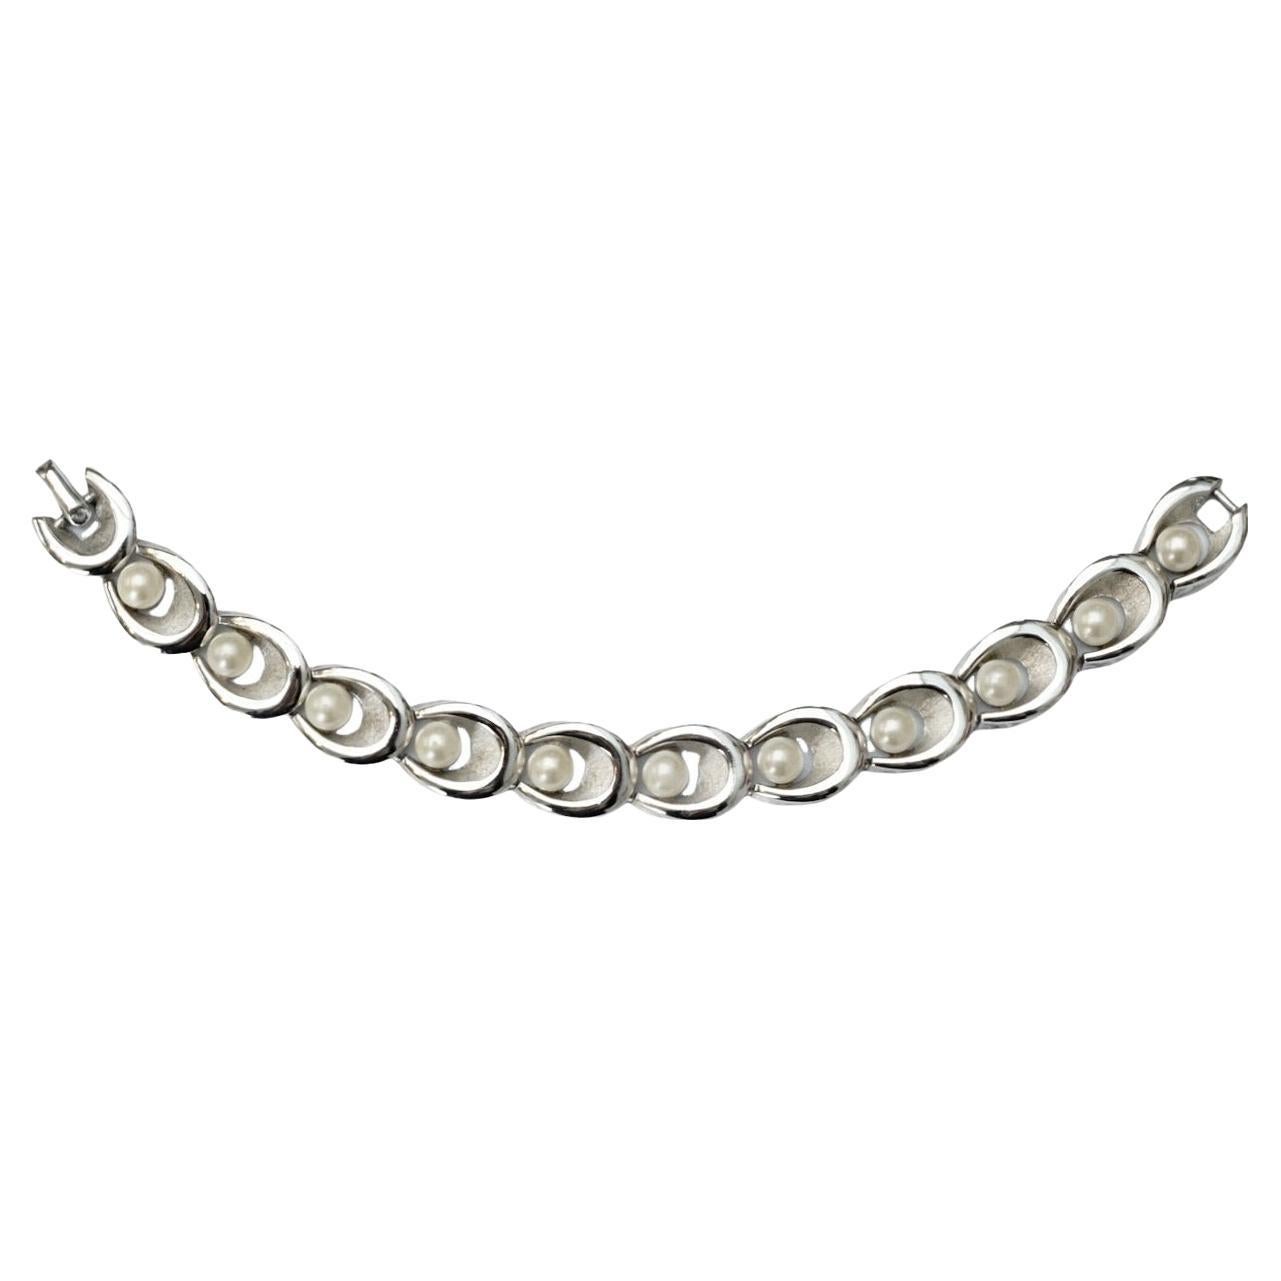 Women's or Men's Trifari Silver Plated Brushed and Shiny Bracelet with Faux Pearls circa 1960s For Sale